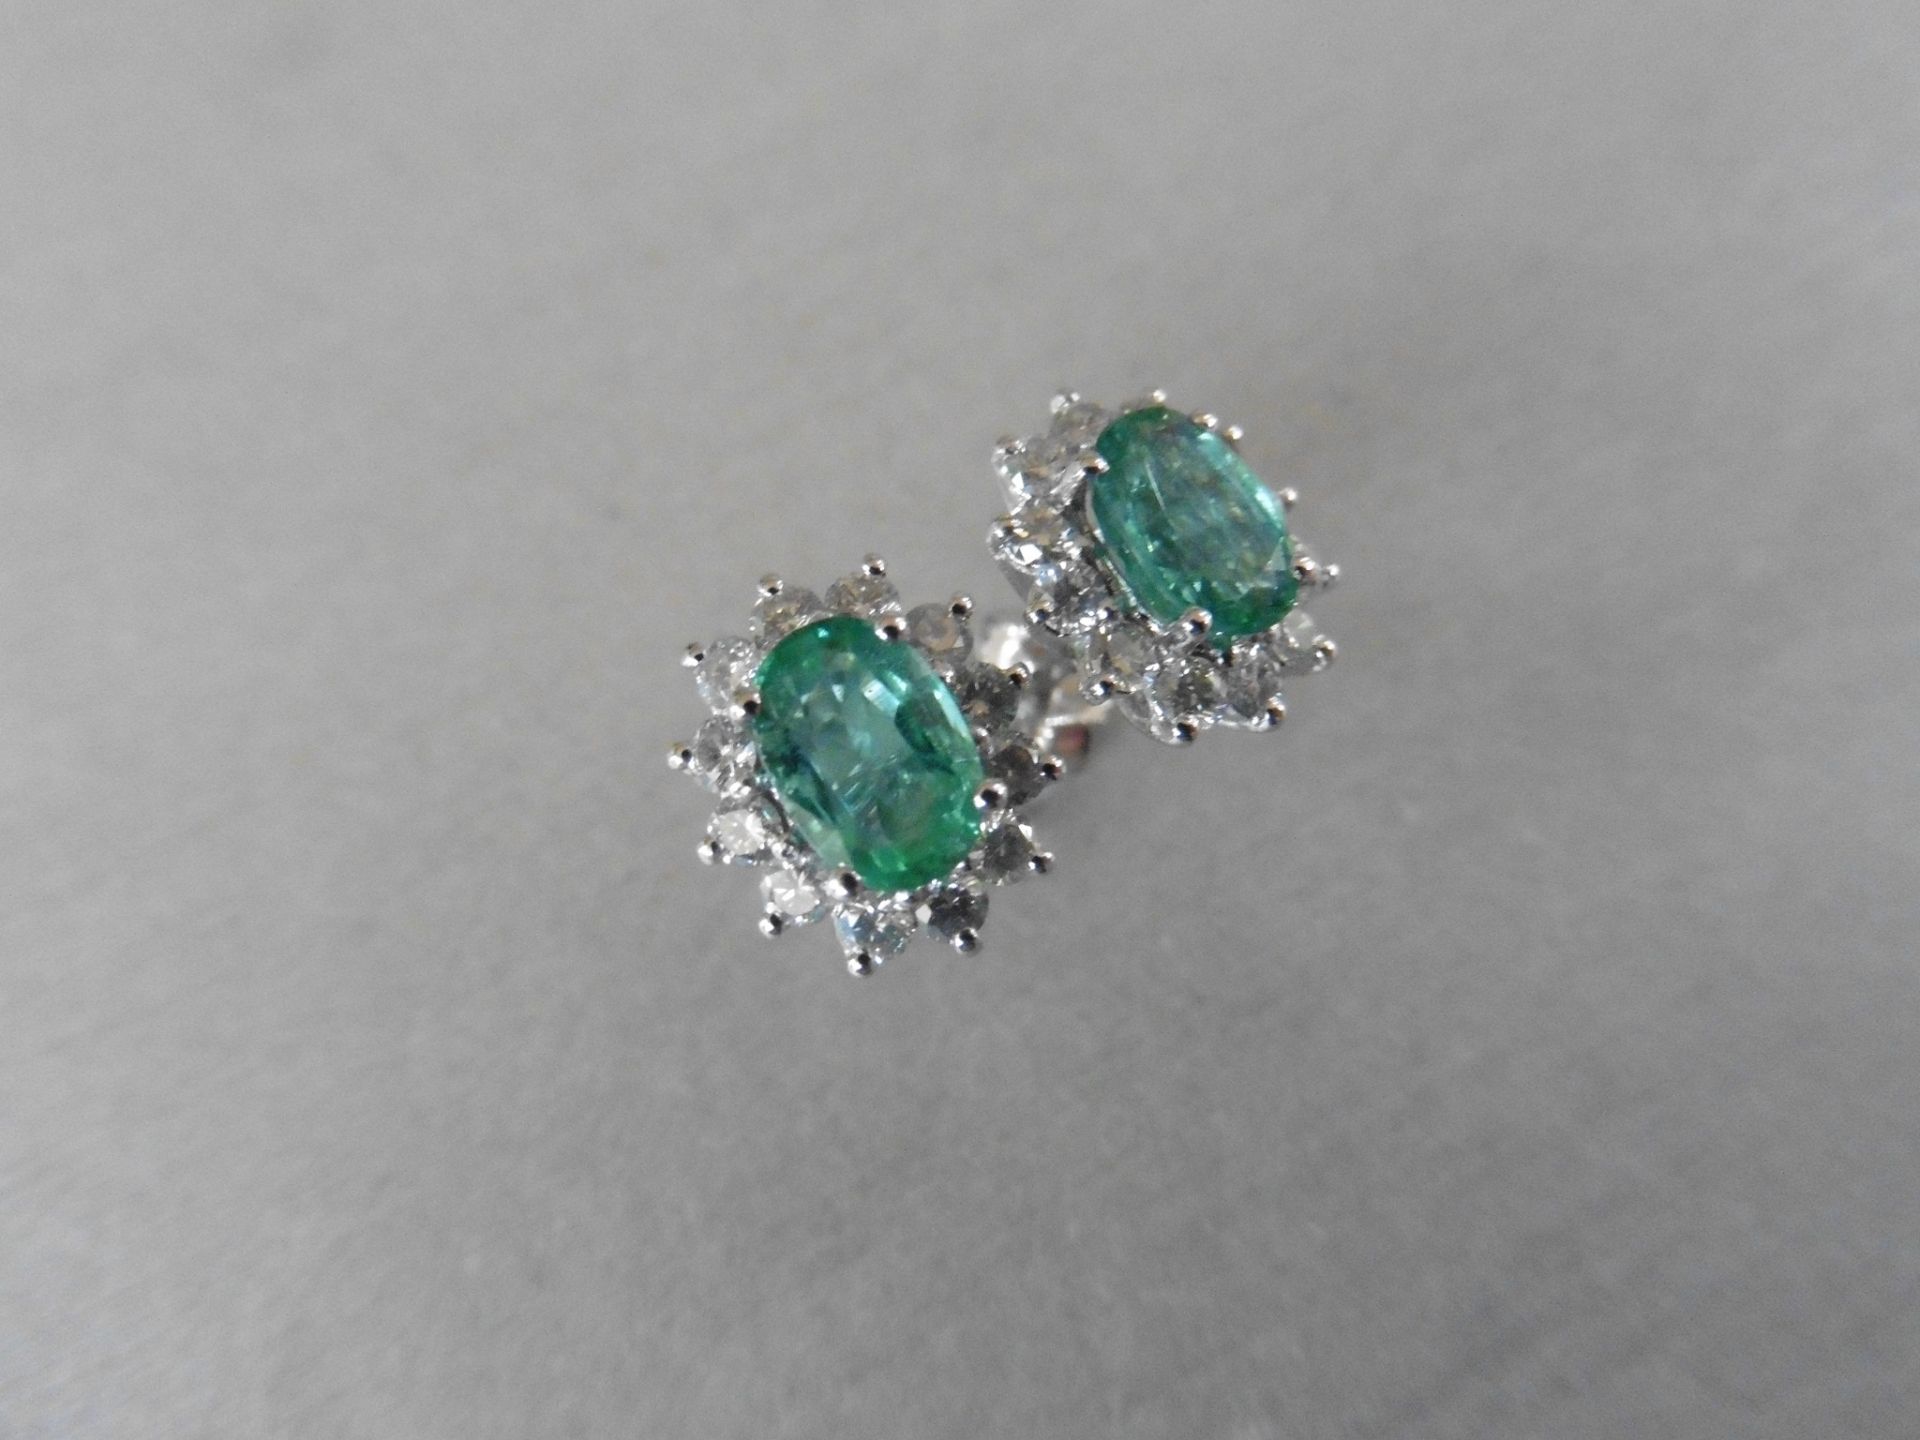 1.60ct emerald and Diamond cluster style stud earrings. Each emerald measures 7mm x 5mm and is